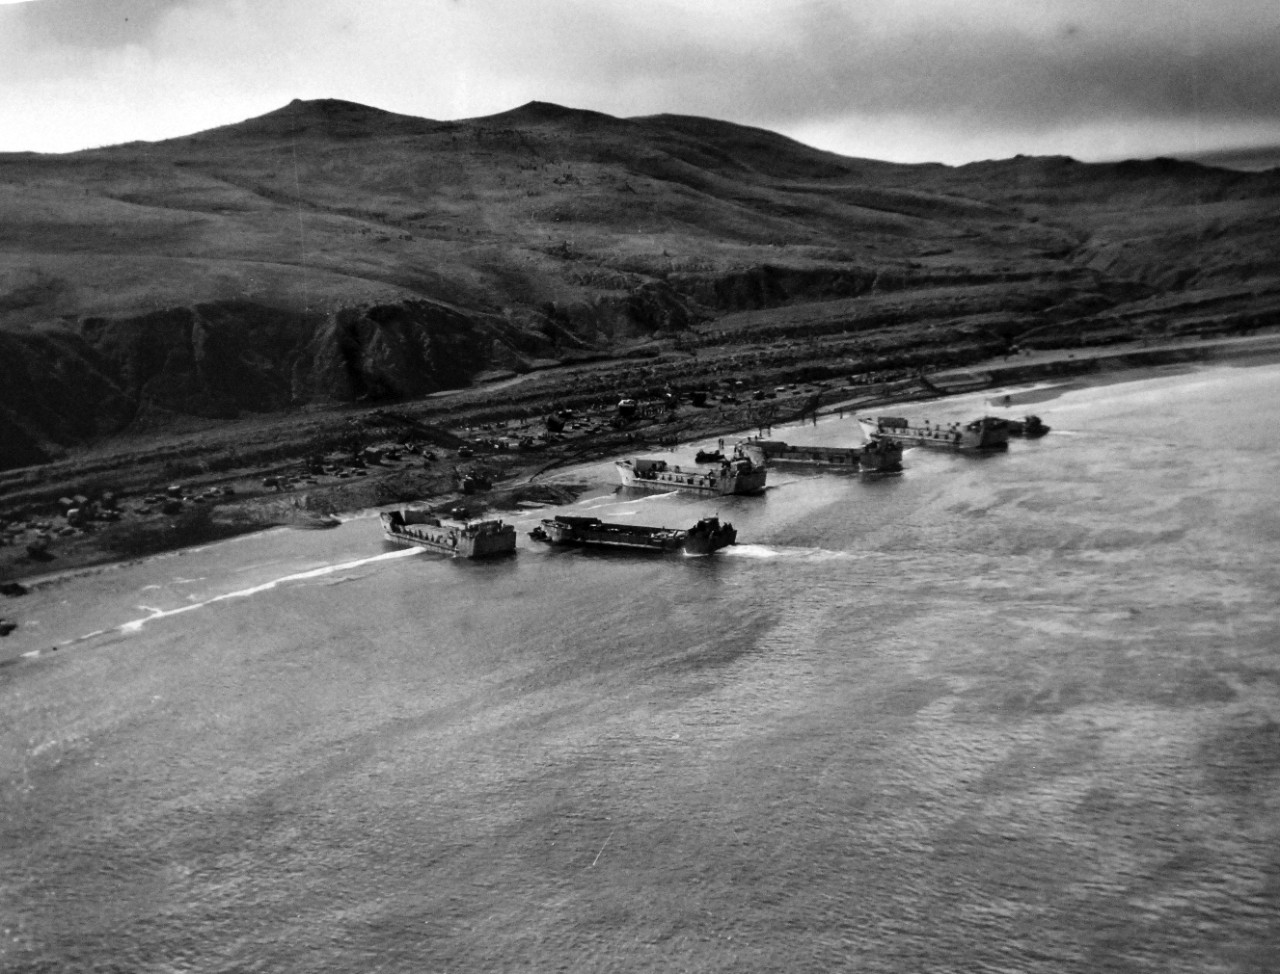 LC-Lot-803-9:  Allied Landing on Kiska Island, August 15, 1943. The barges are the familiar LCTs, LCMs, and LCVPs, land unopposed on the island.  U.S. Navy photograph, released August 23, 1943.  Photographed through Mylar sleeve.  Courtesy of the Library of Congress.   (2015/11/06).